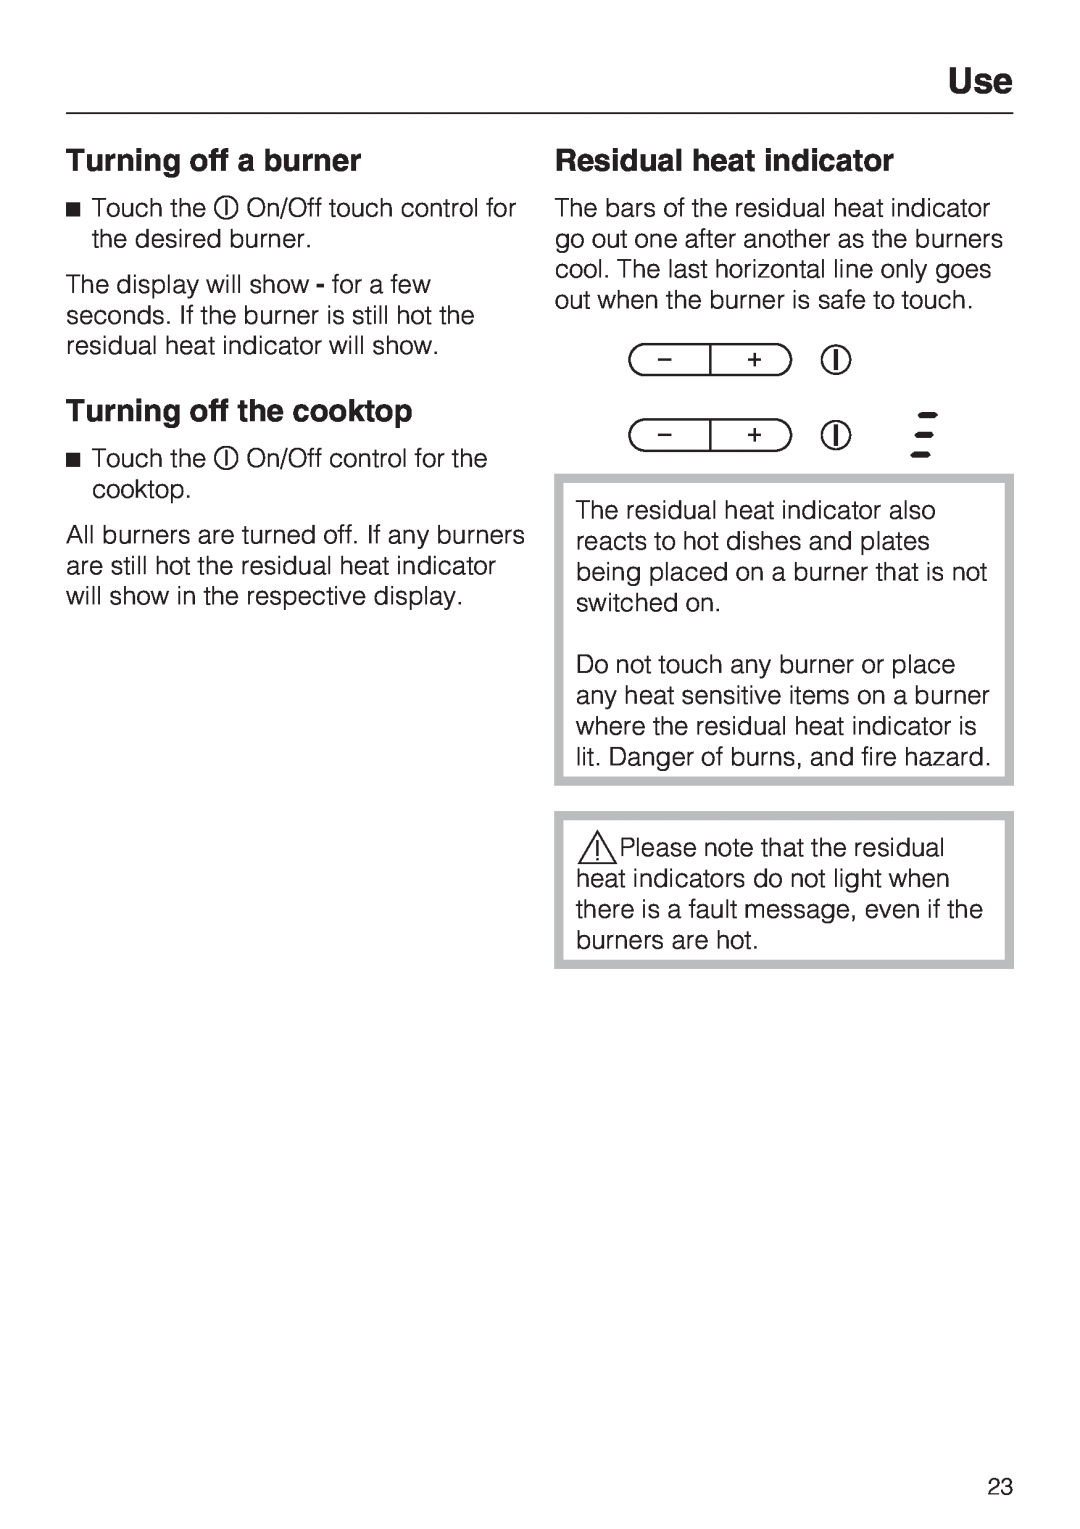 Miele KM 5753, KM 5758 installation instructions Turning off a burner, Turning off the cooktop, Residual heat indicator 